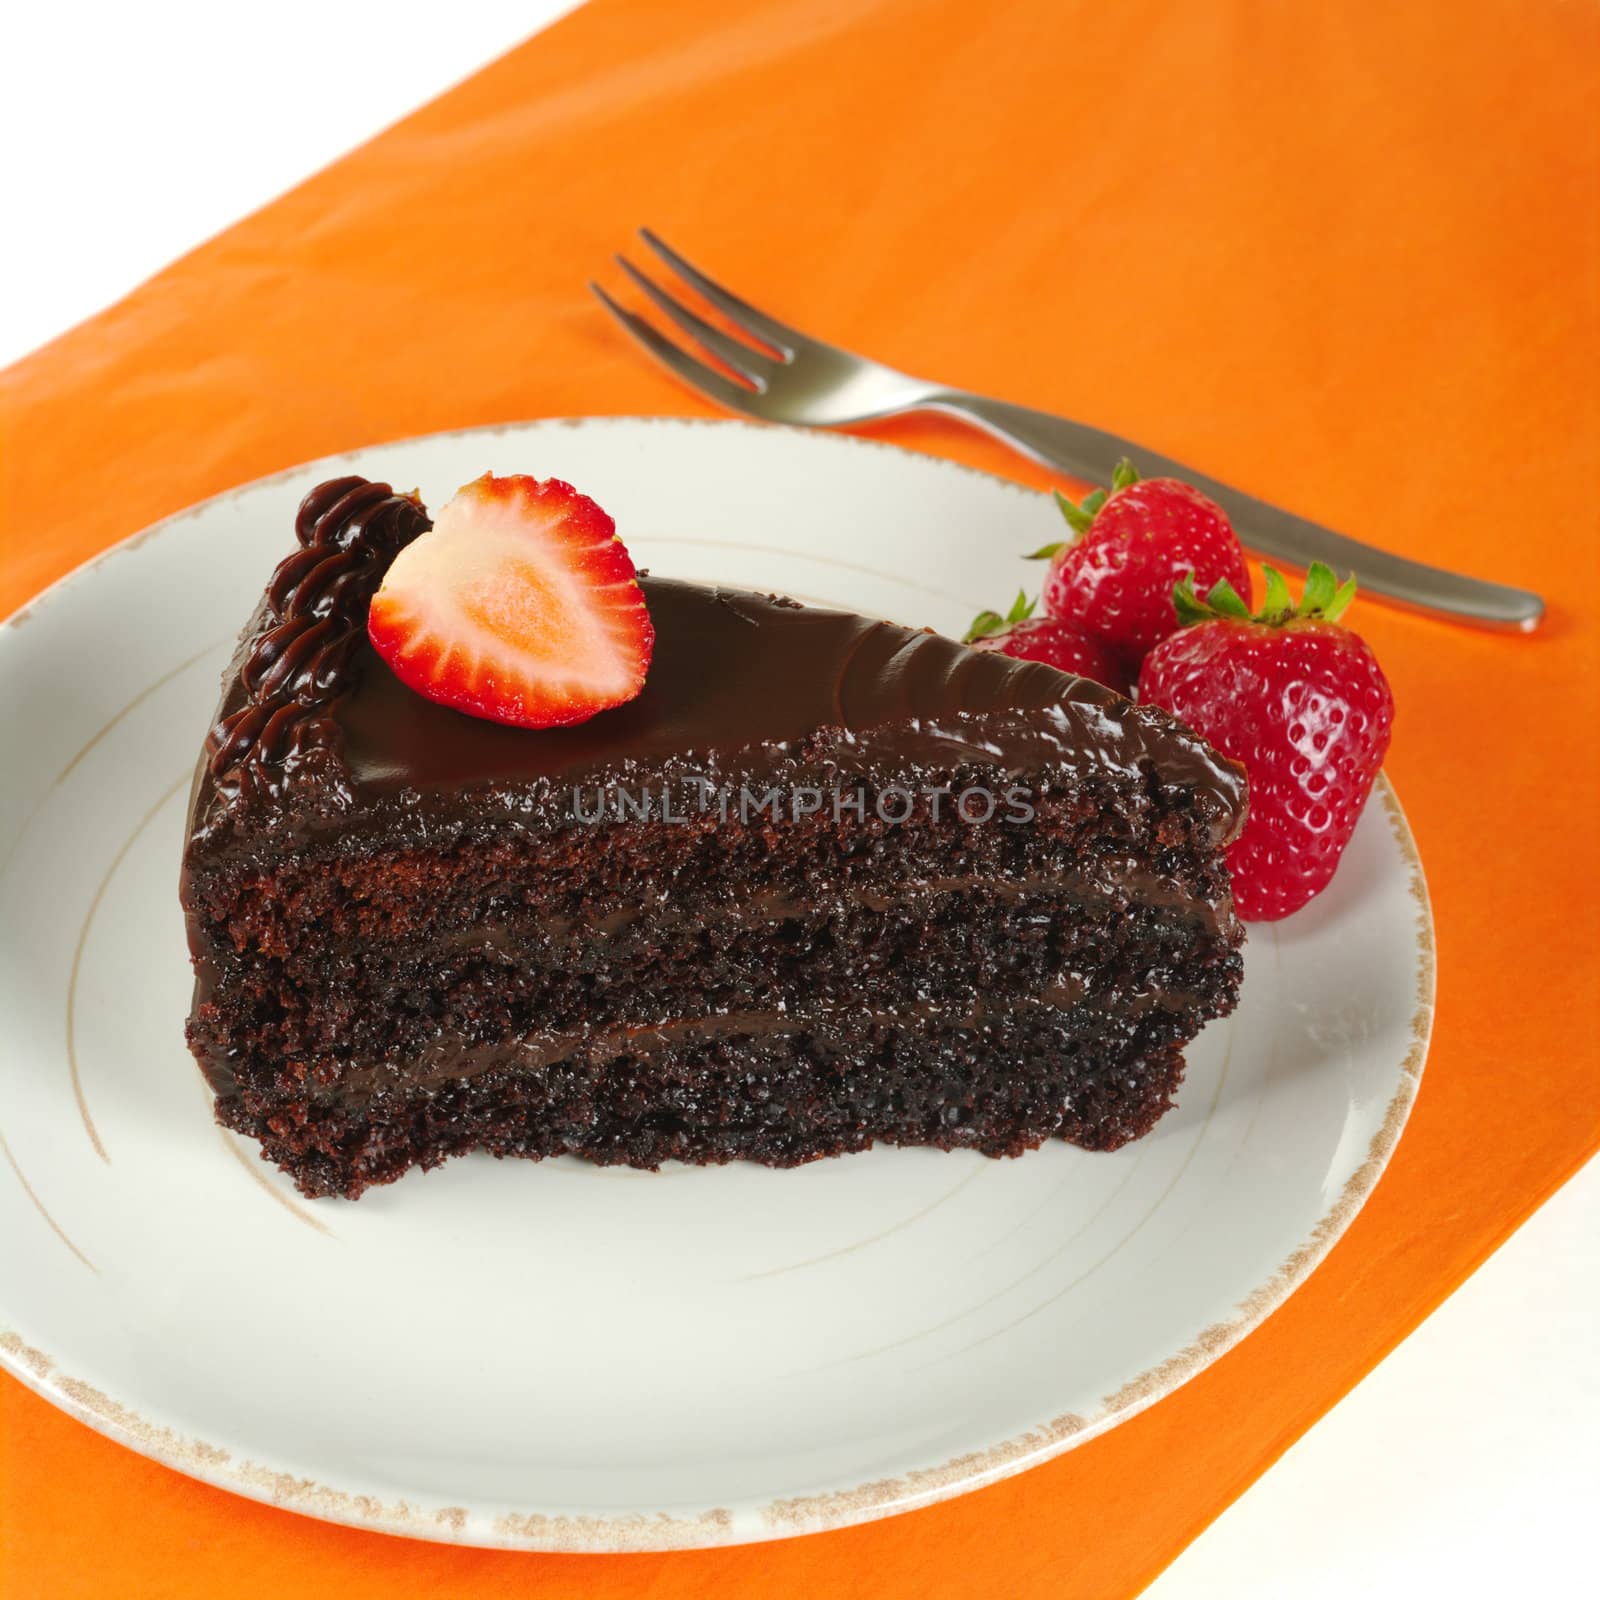 Chocolate cake with strawberries on orange mat with fork (Selective Focus)